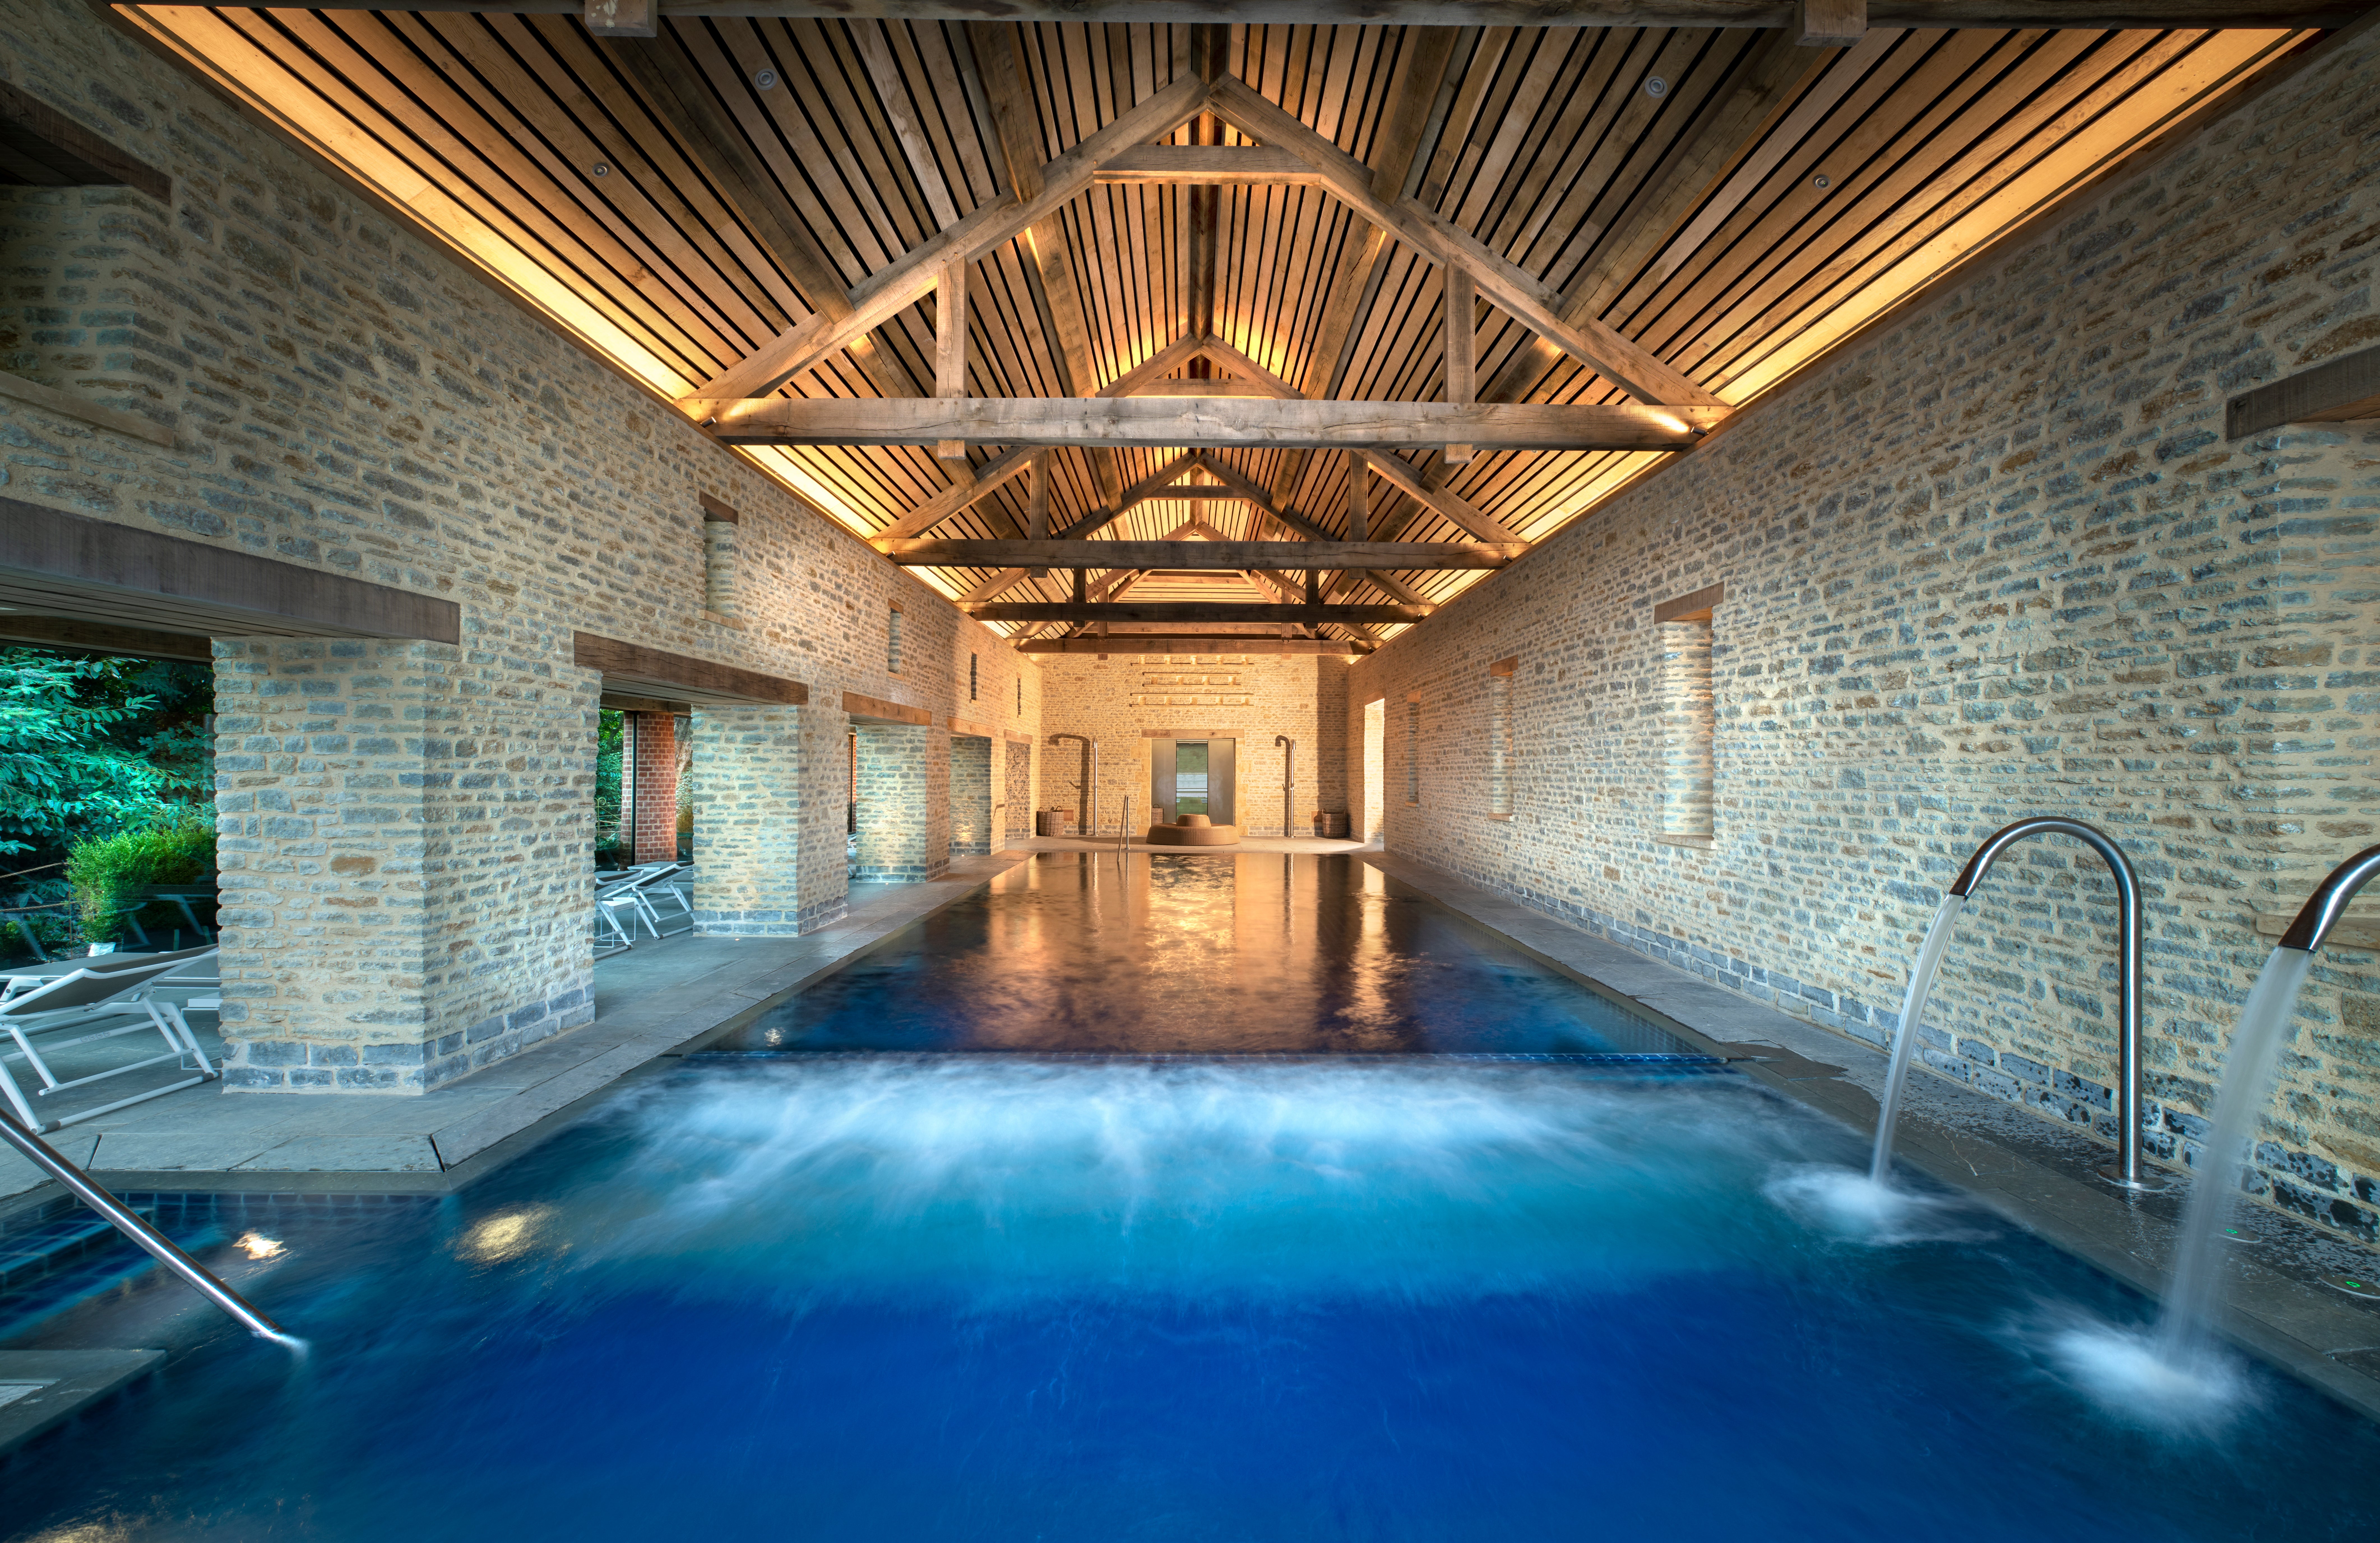 Take a dip after a luxury spa treatment at the Newt